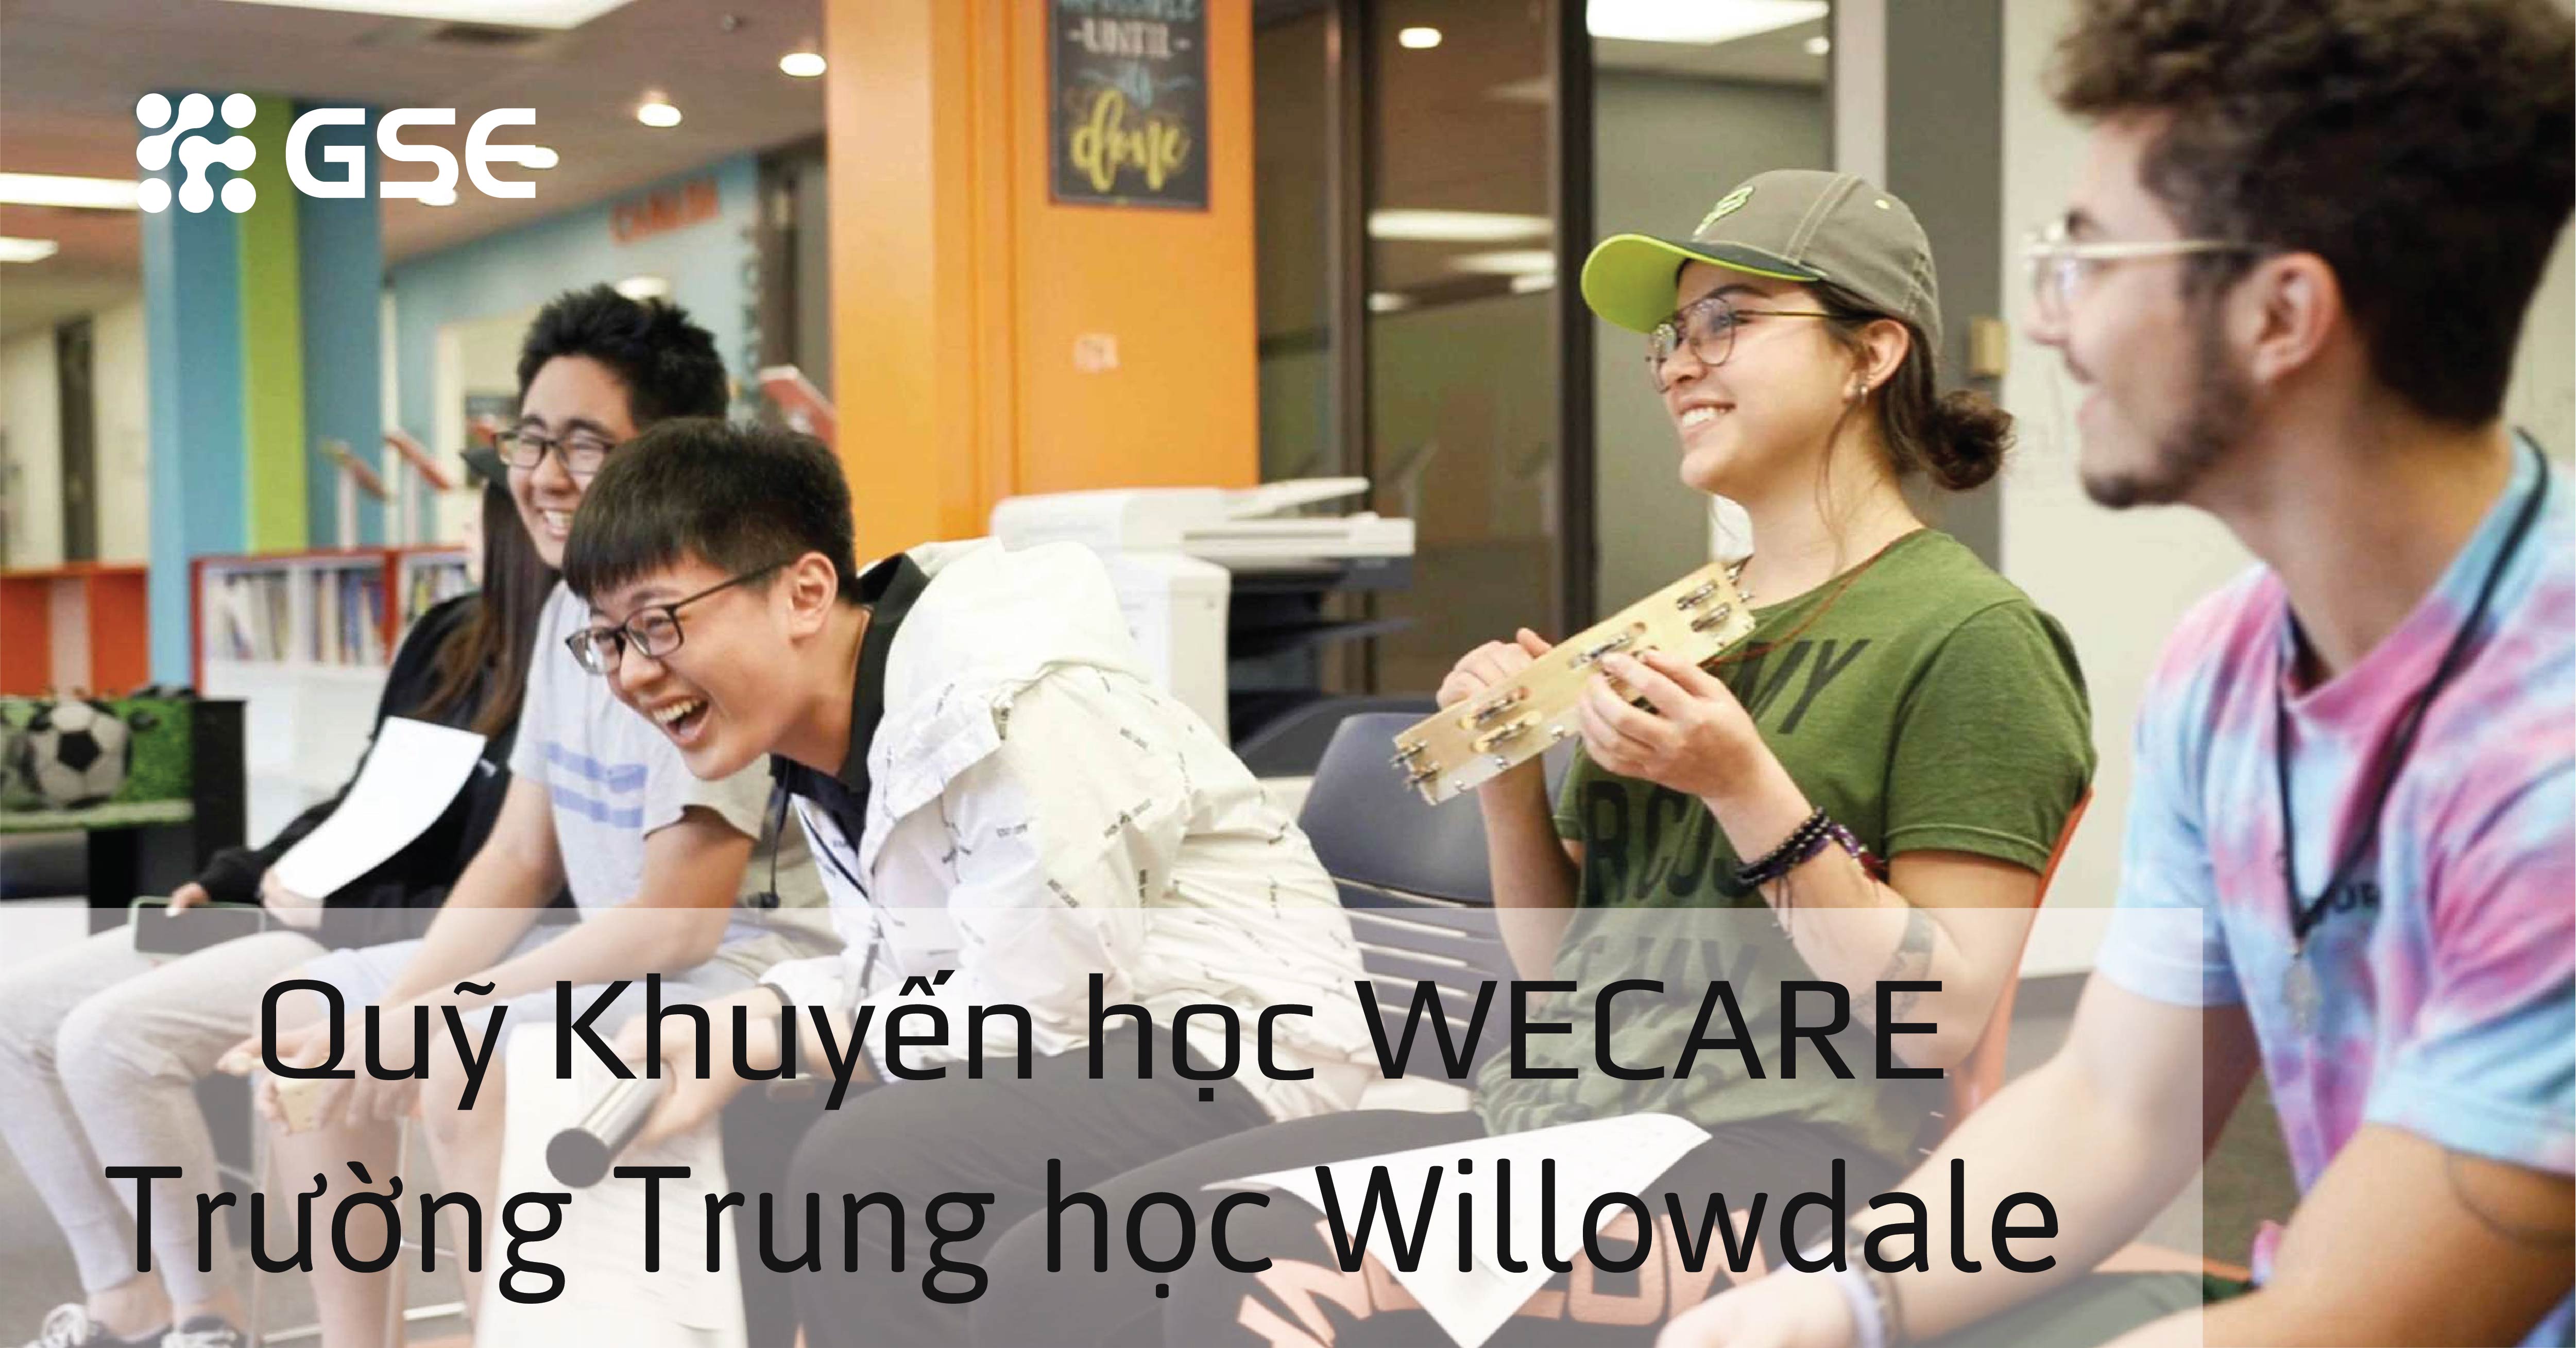 truong trung hoc willowdale 05